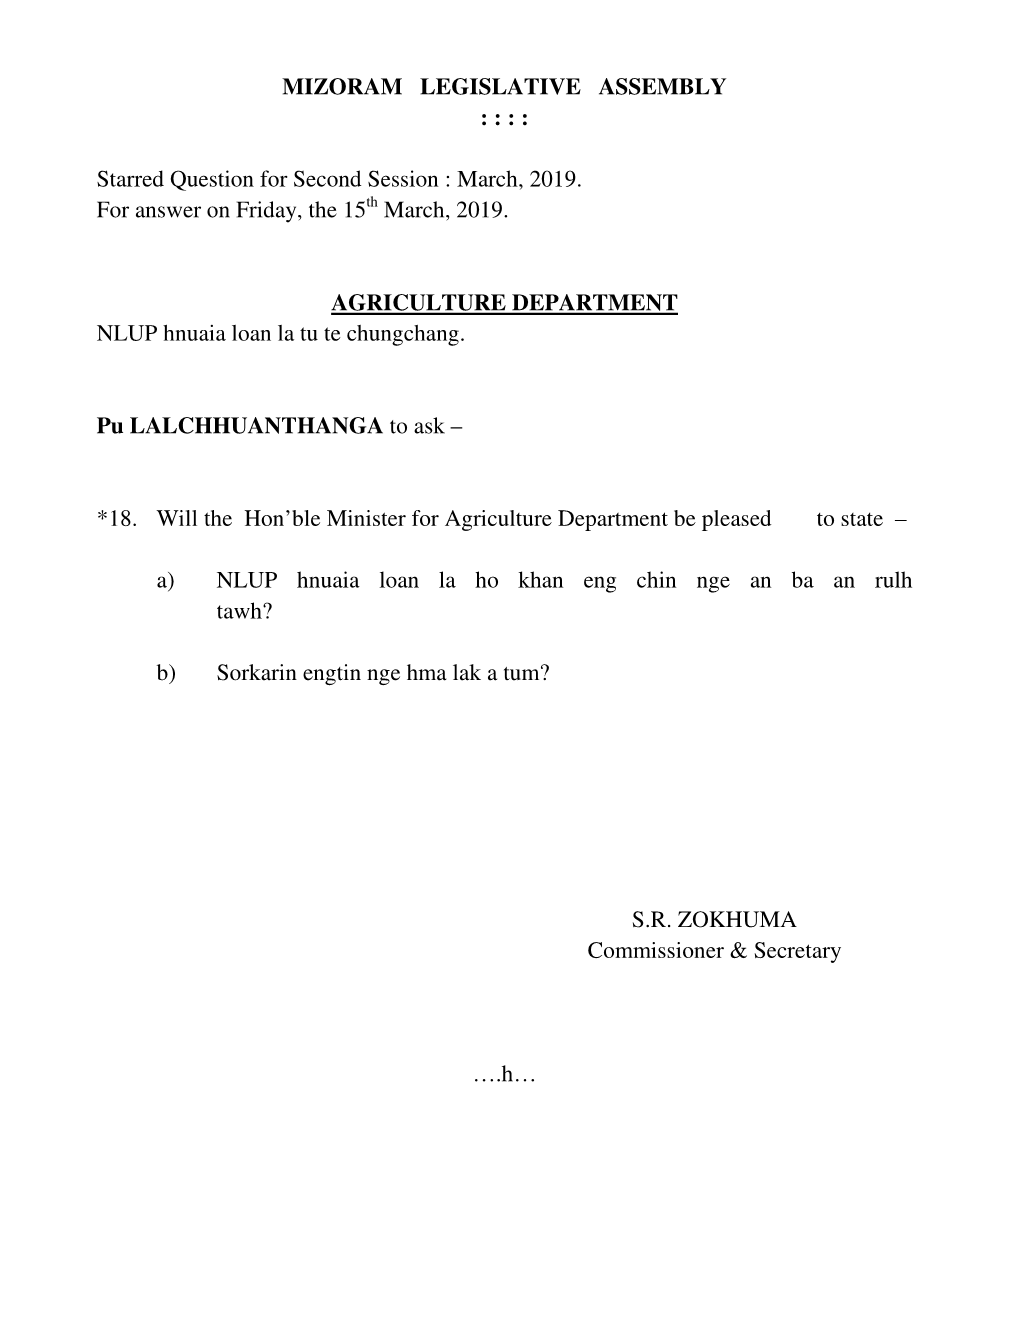 MIZORAM LEGISLATIVE ASSEMBLY : : : : Starred Question for Second Session : March, 2019. for Answer on Friday, the 15 March